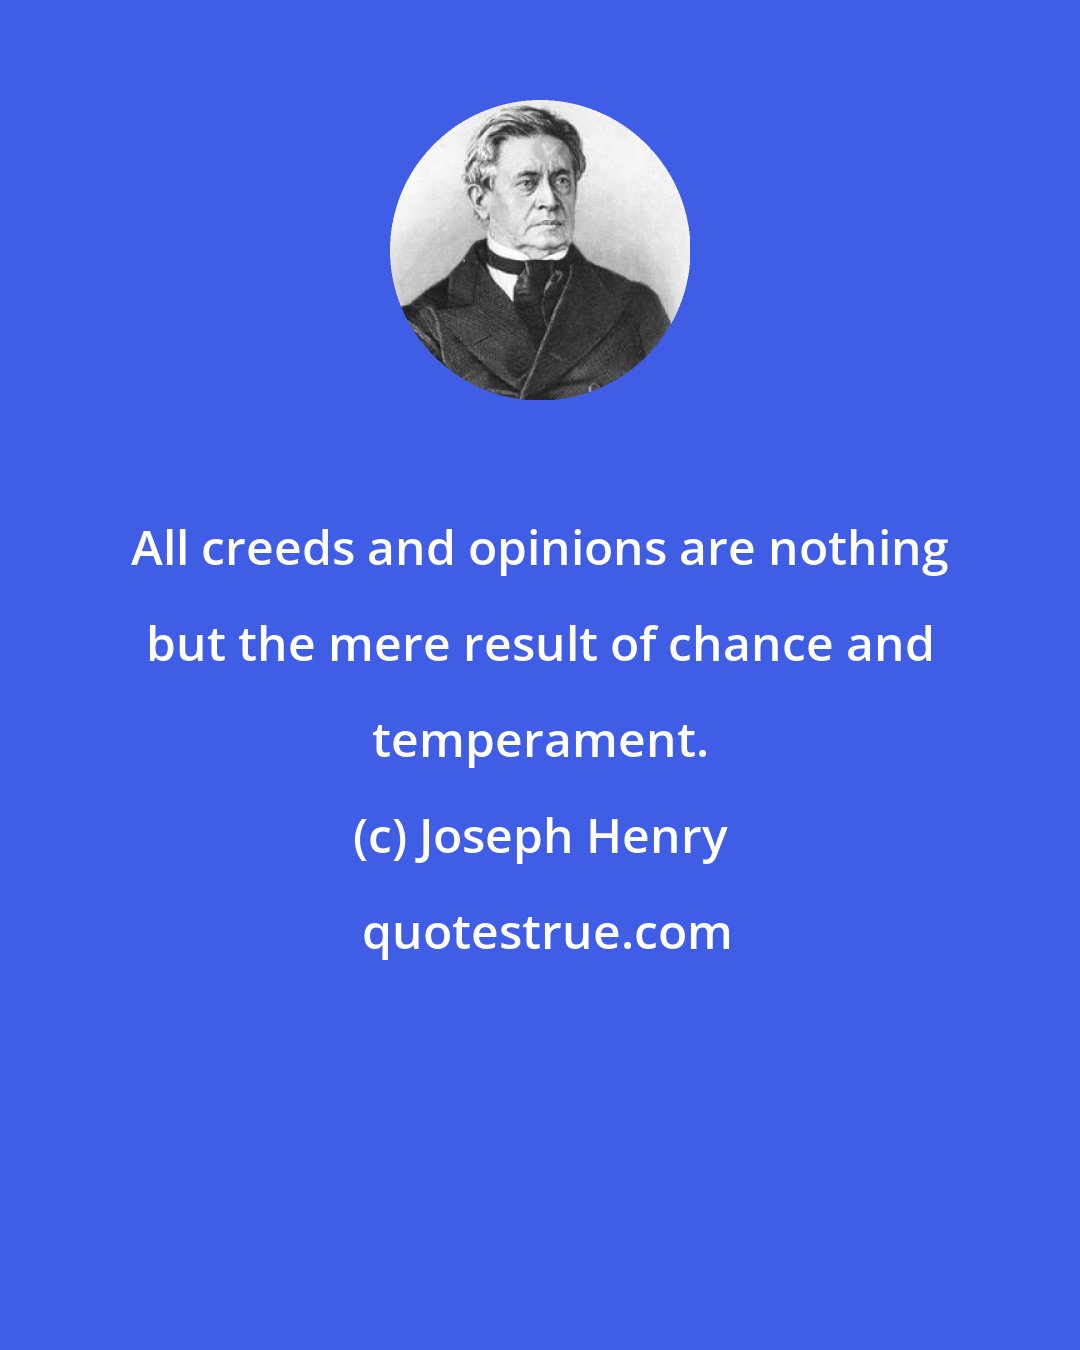 Joseph Henry: All creeds and opinions are nothing but the mere result of chance and temperament.